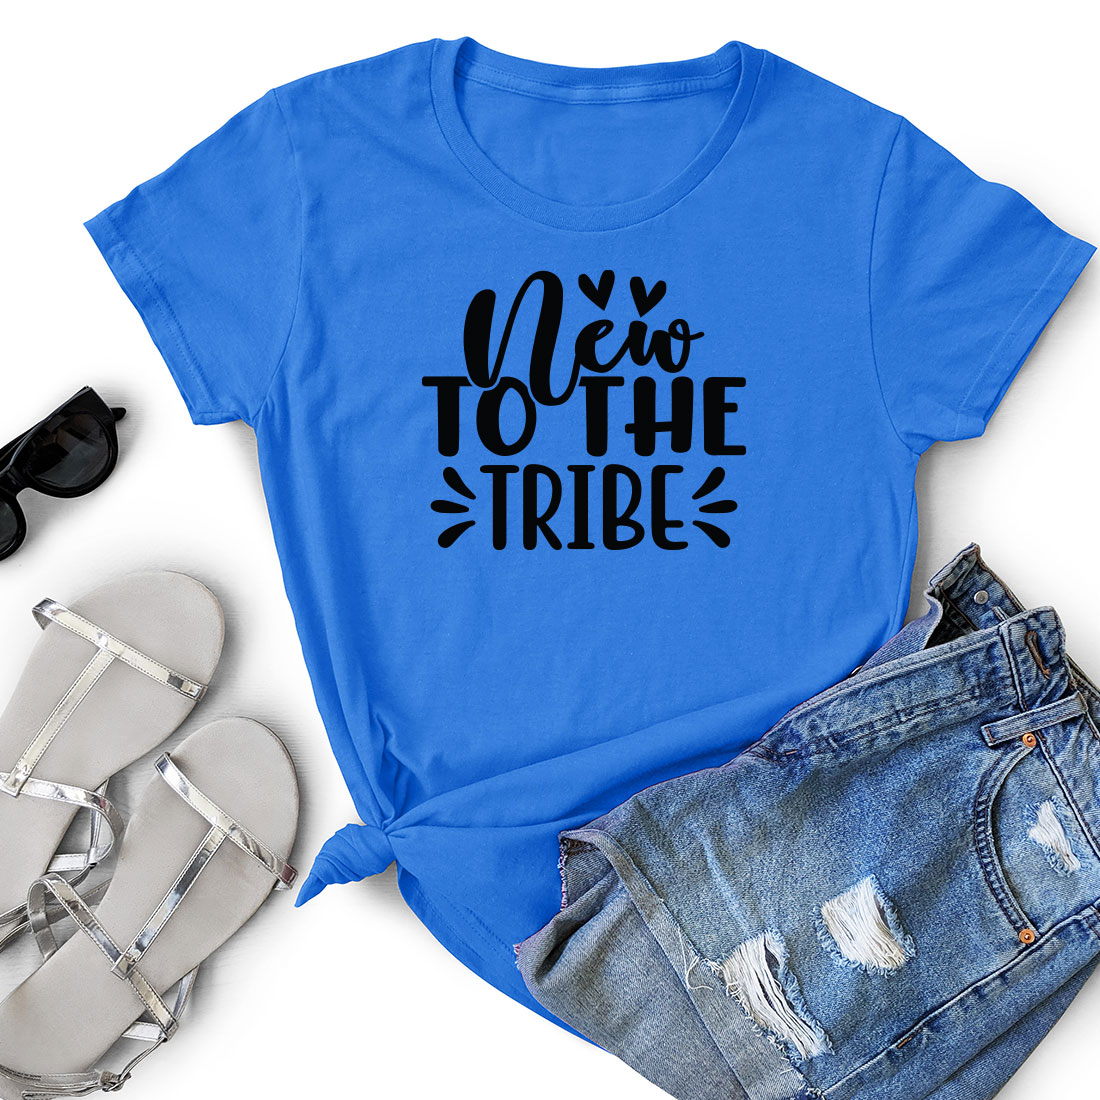 T - shirt that says yes to the tribe next to a pair of shorts.